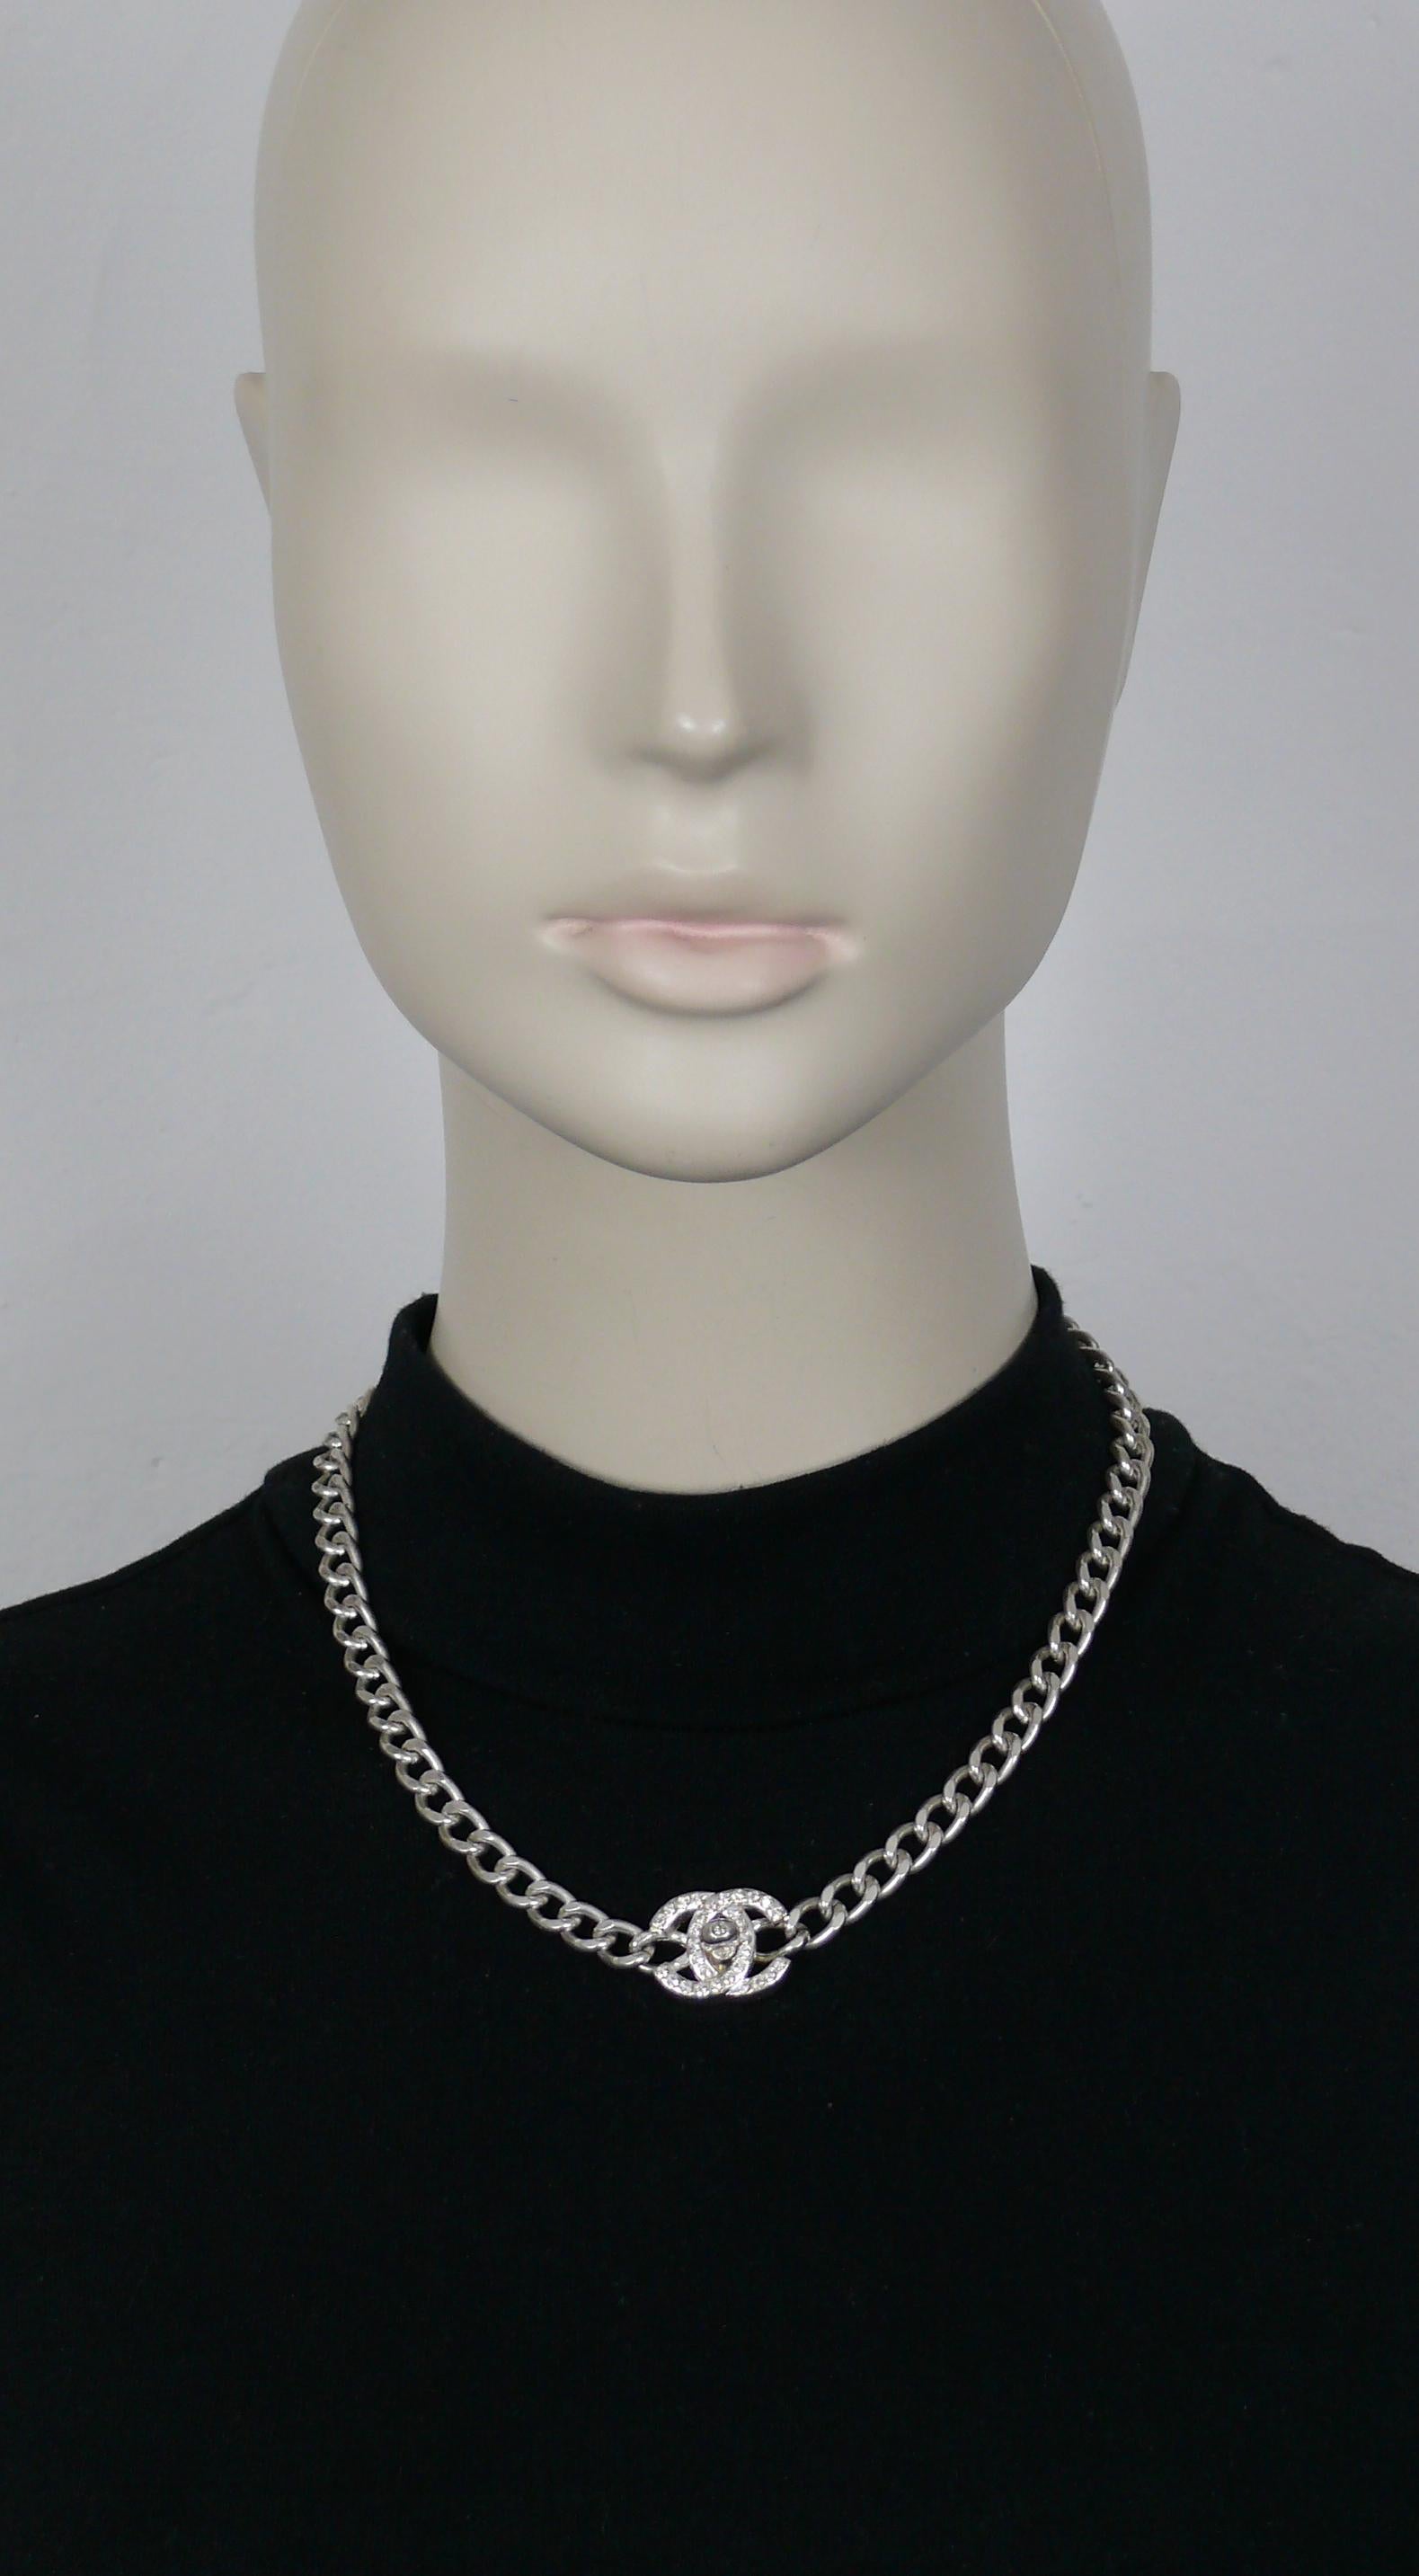 CHANEL by KARL LAGERFELD vintage 1996 silver tone chain necklace featuring an iconic turn-lock clasp embellished with clear crystals.

Fall 1996 Collection.

Embossed CHANEL 96 A Made in France.

Indicative measurements : length approx. 44.7 cm